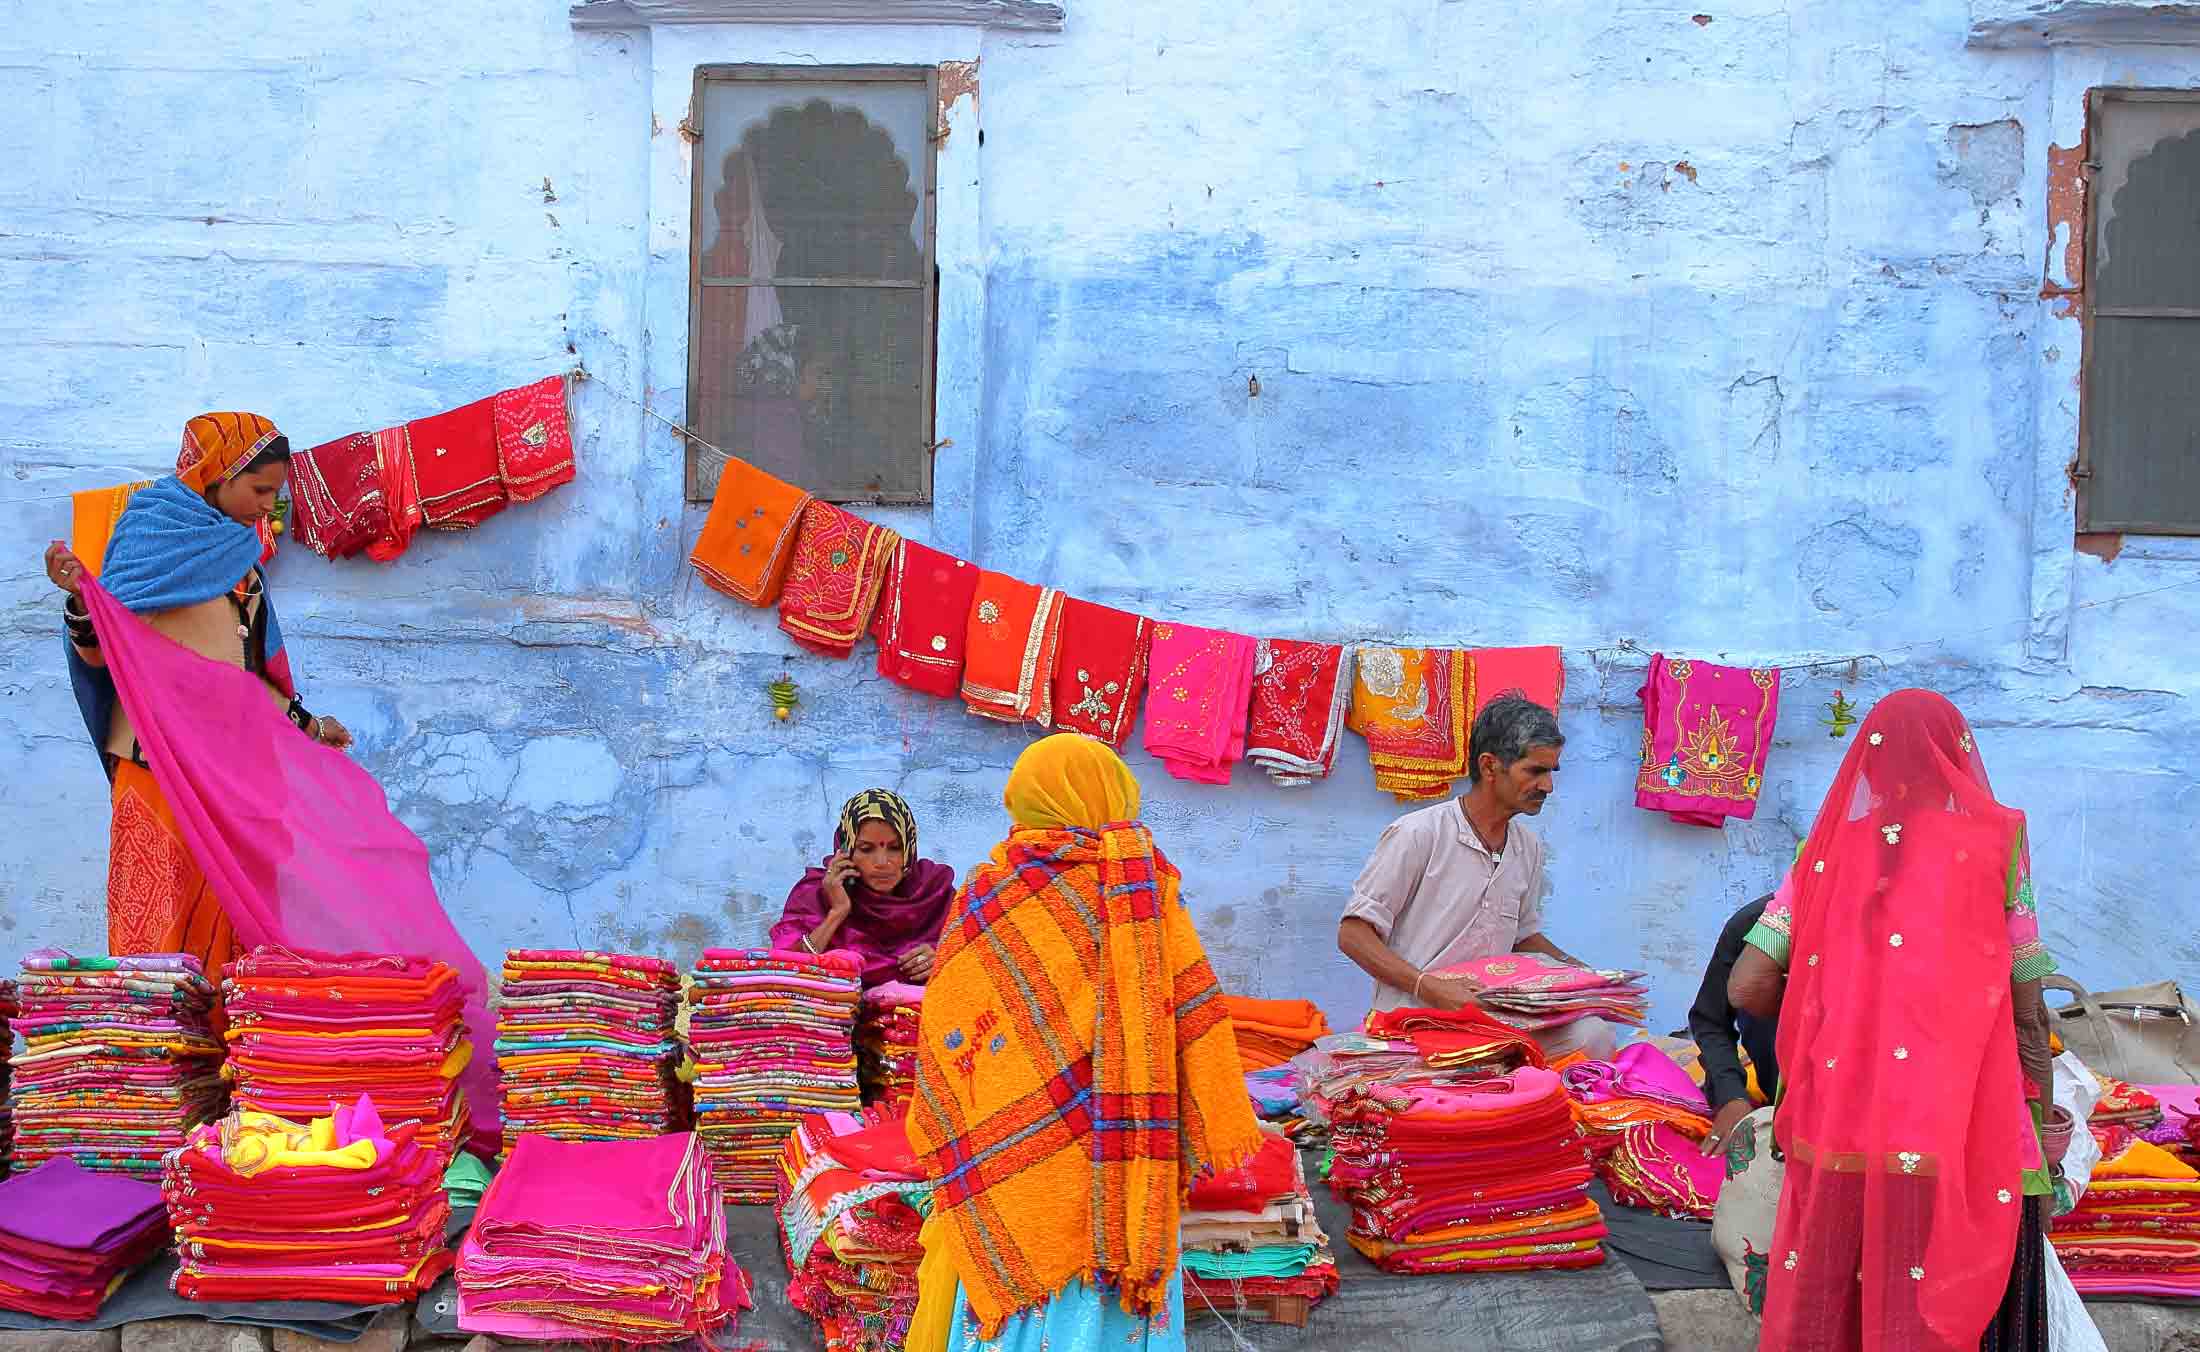 Streets in Rajasthan, India